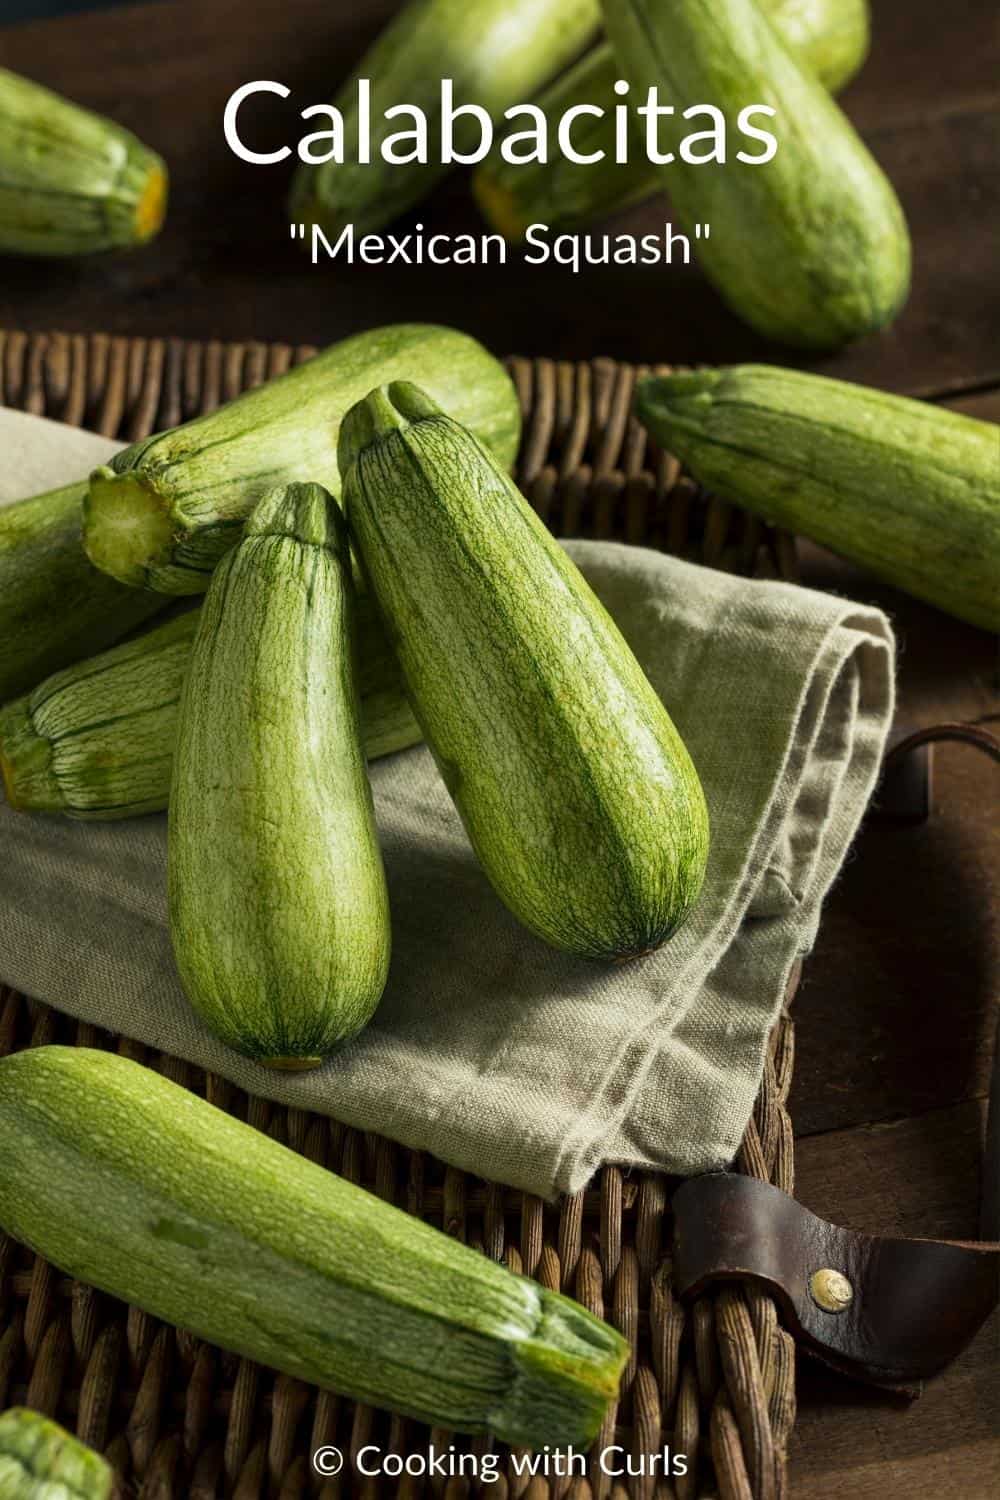 Image of Mexican squash on a wicker tray.